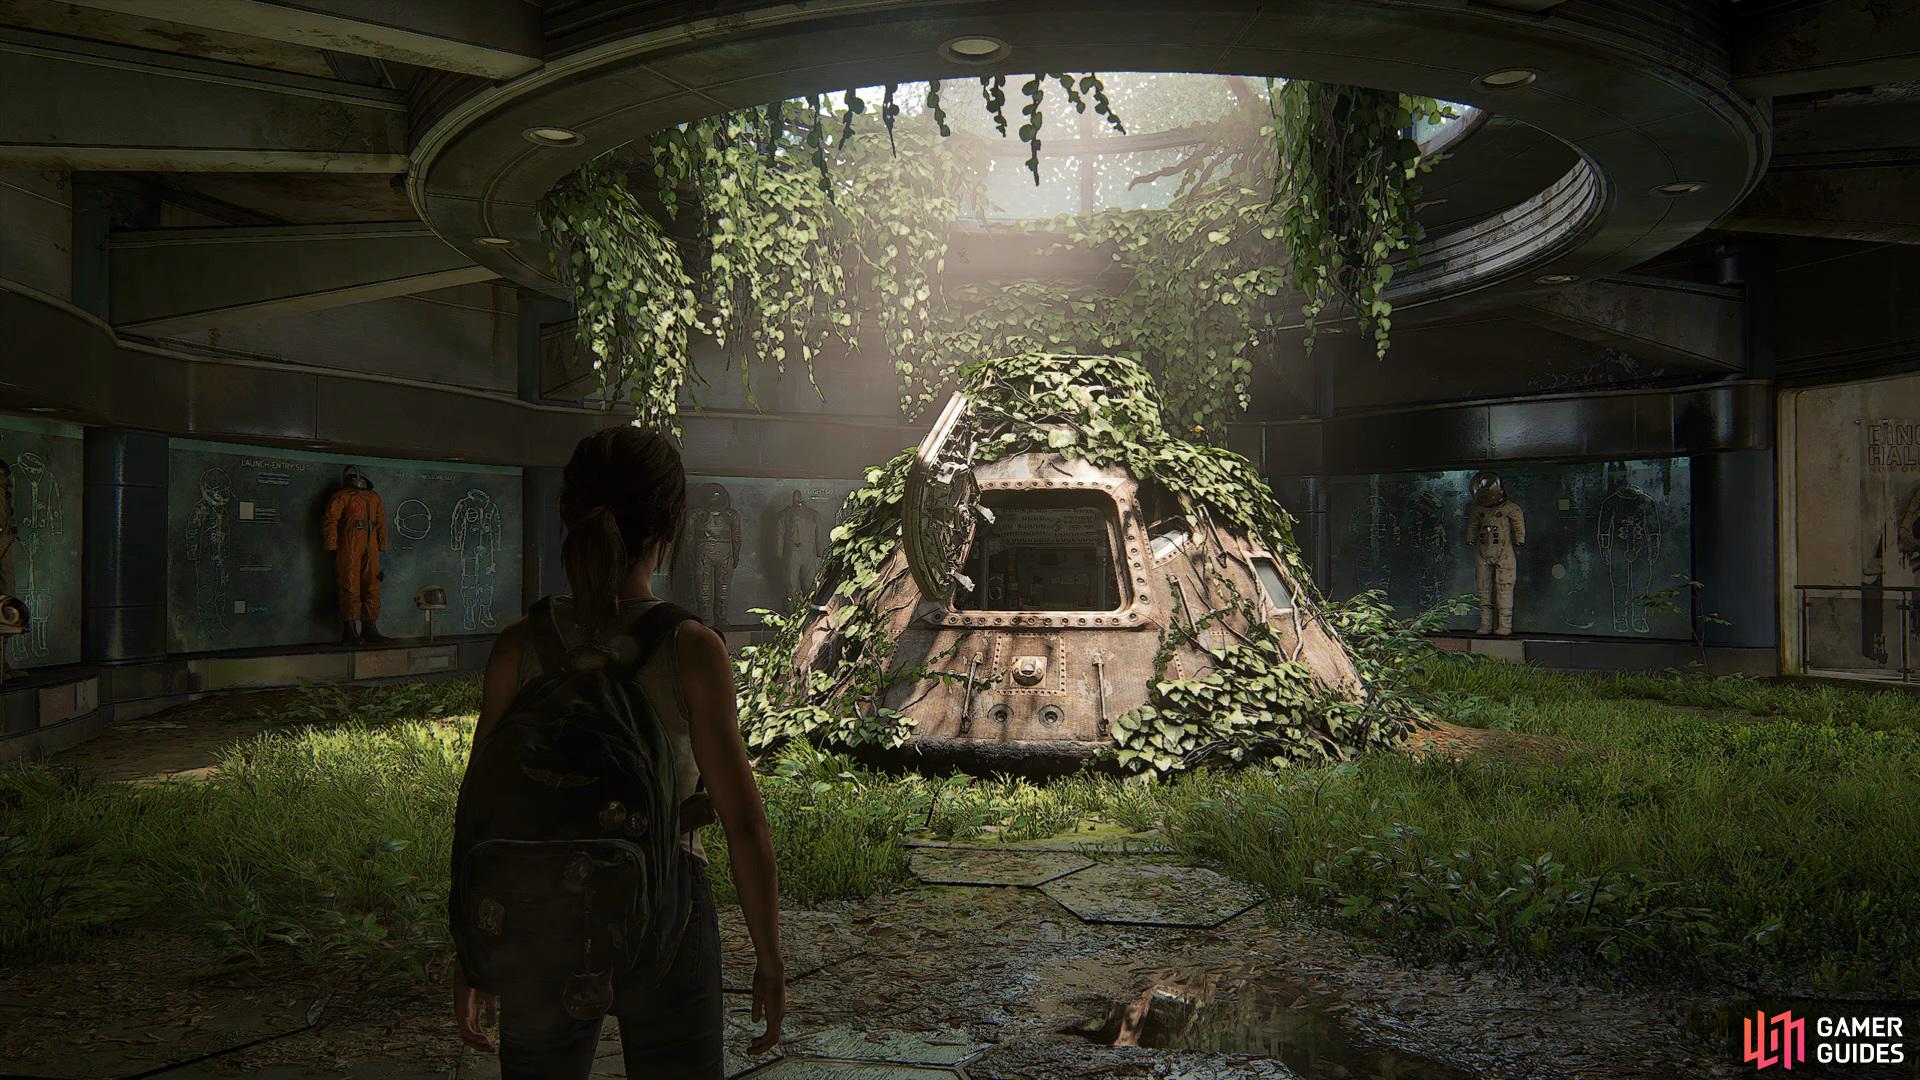 The Last of Us' Season 1, Episode 2 Recap: Exit Through the Gift Shop - The  New York Times